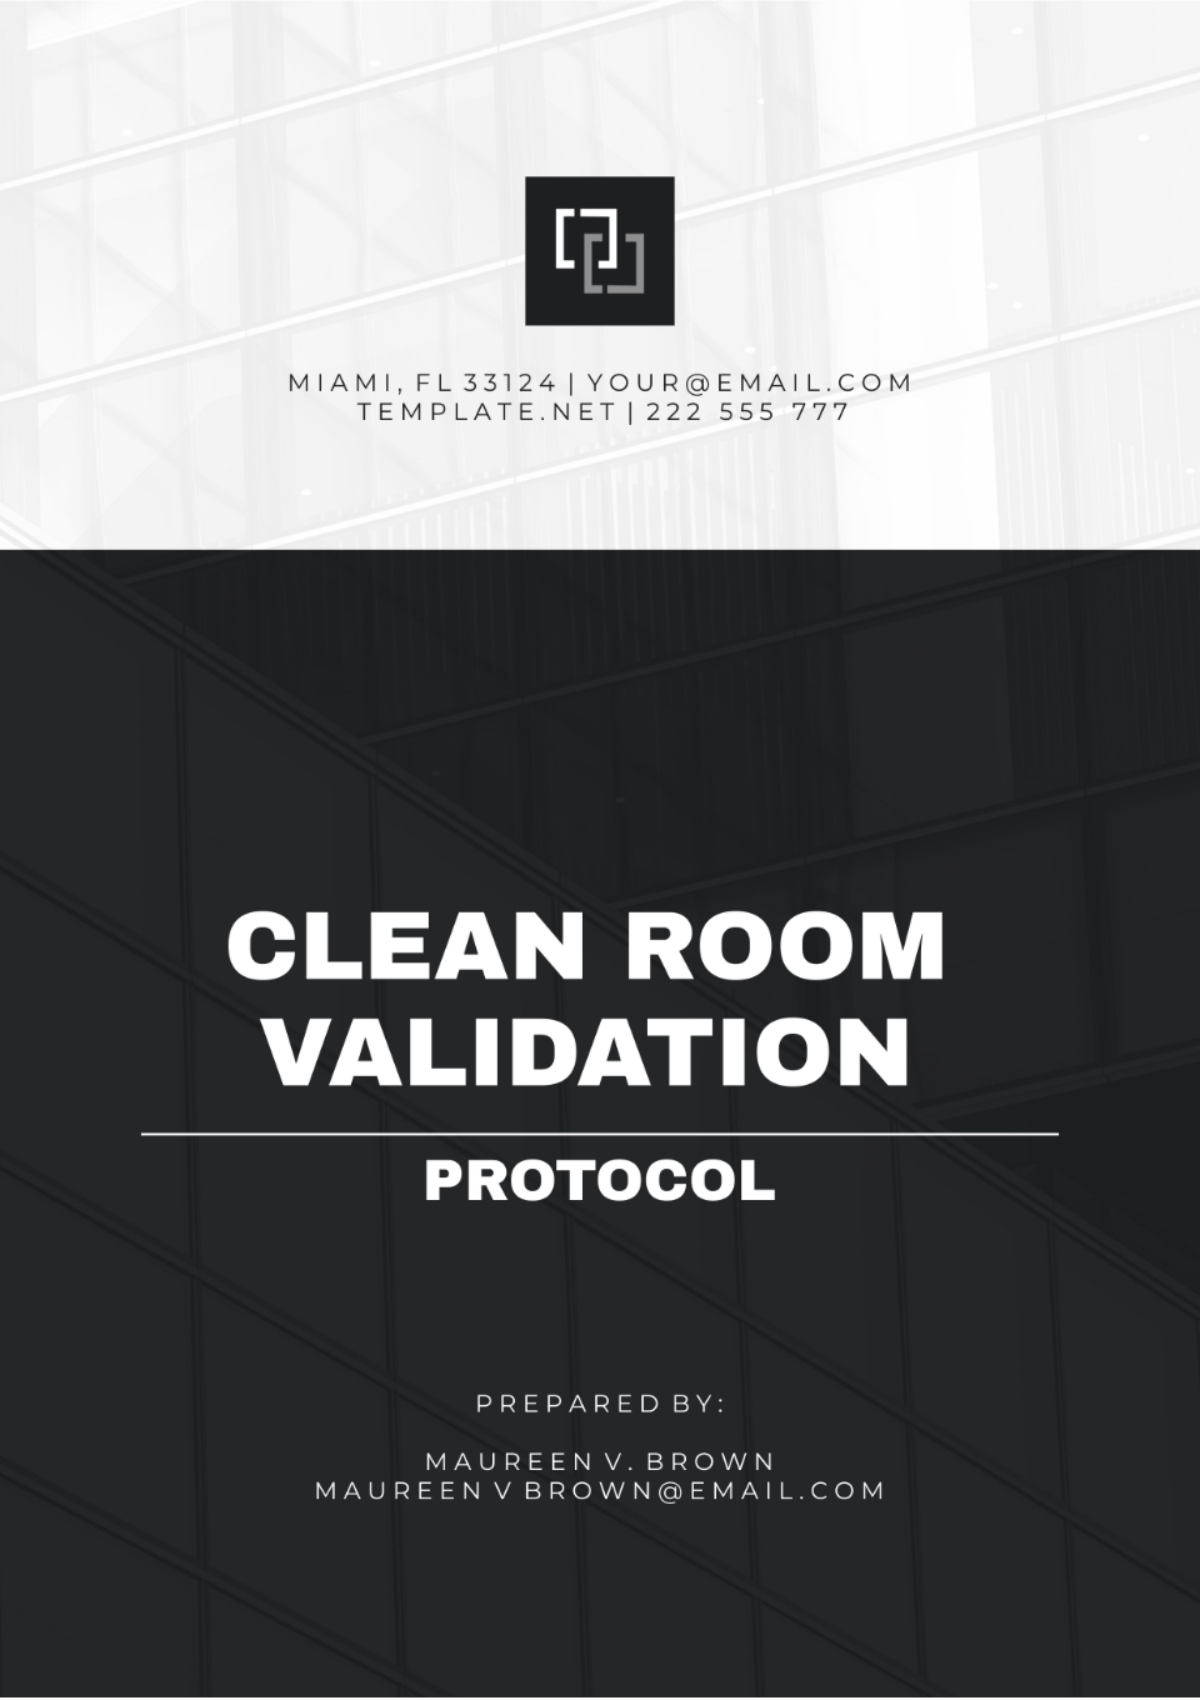 Clean Room Validation Protocol Template